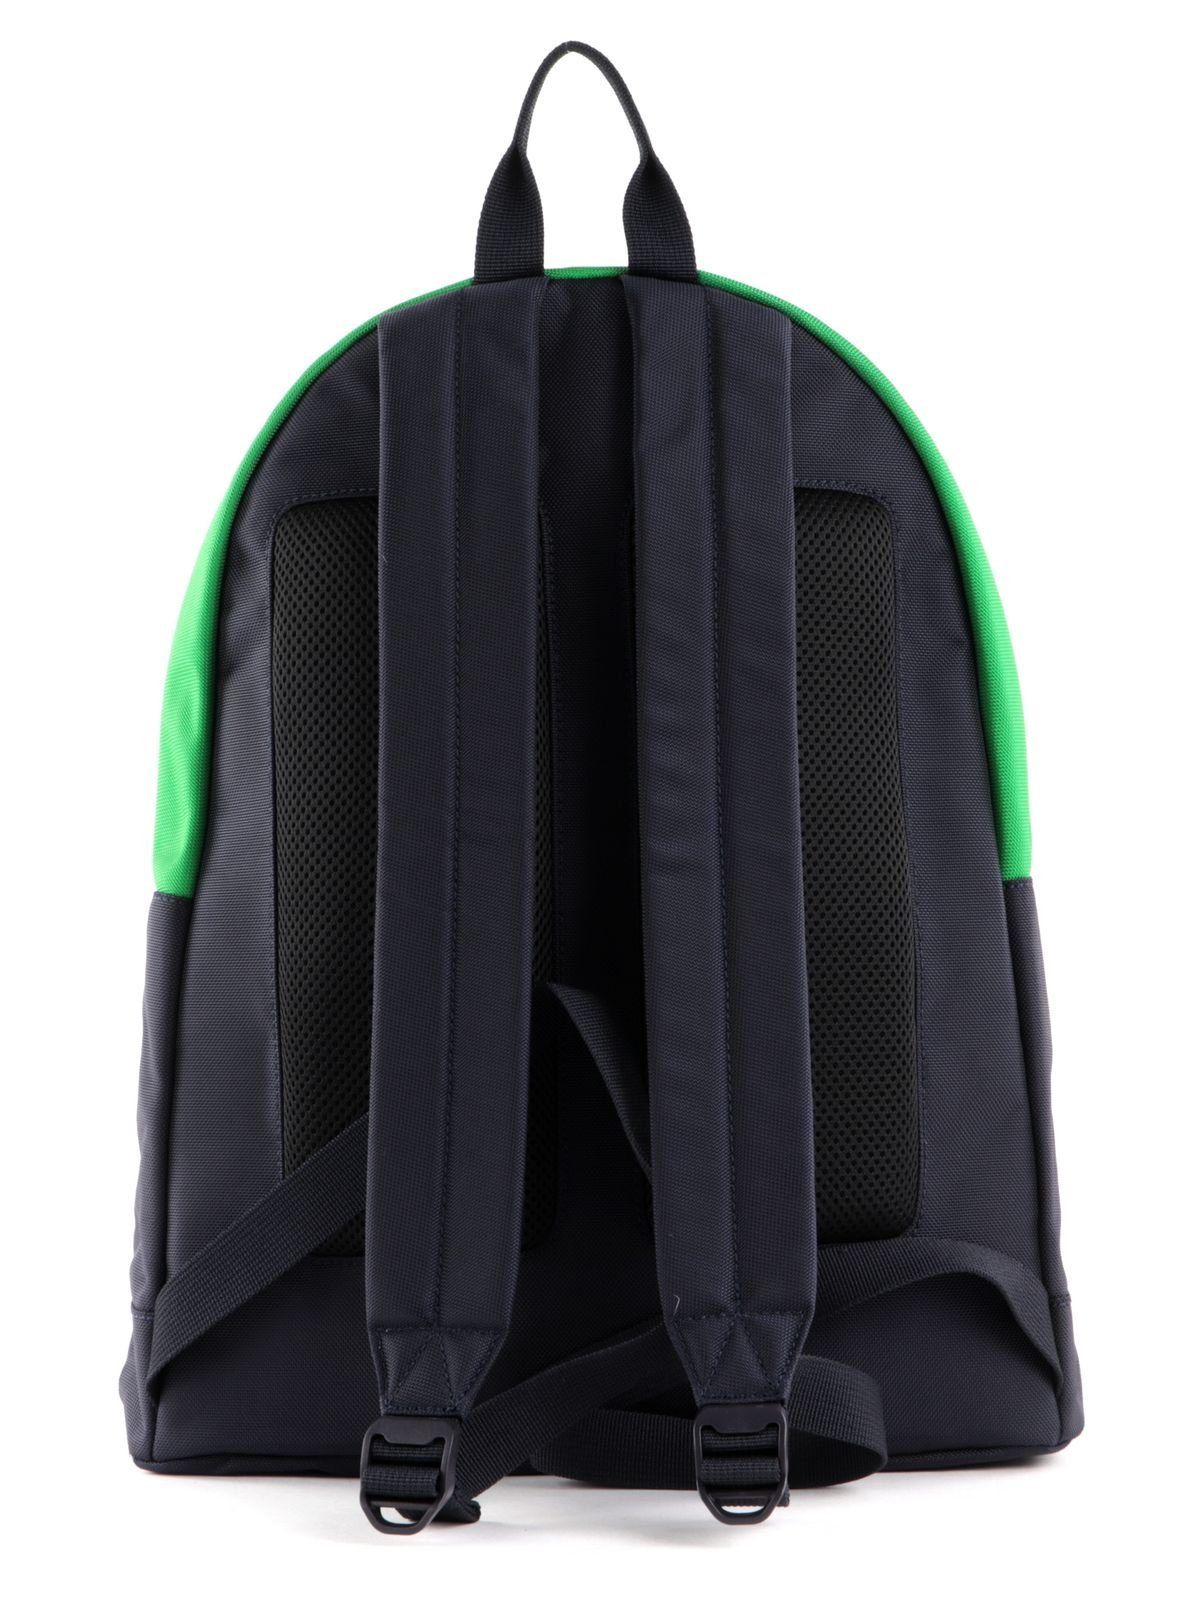 Malachite Lacoste Abime Azur Holiday Rucksack Package